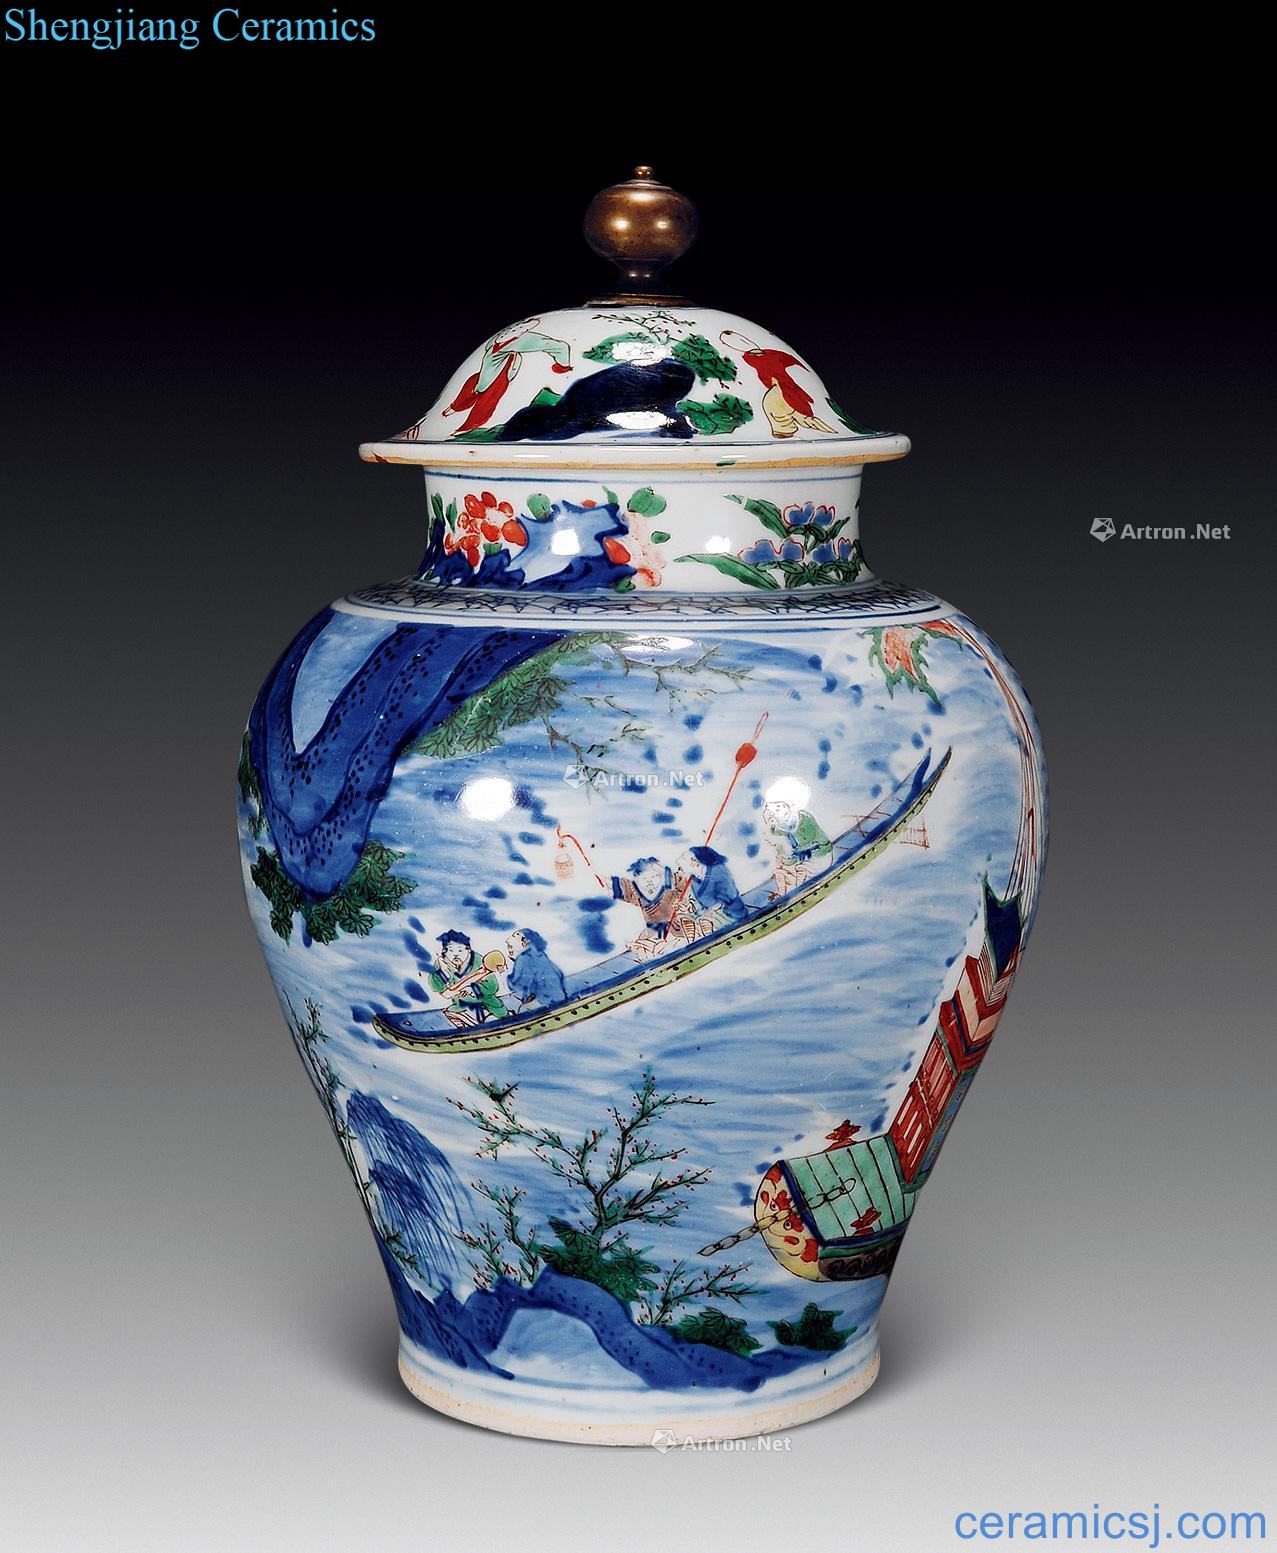 The late Ming dynasty Add landscape general character canister